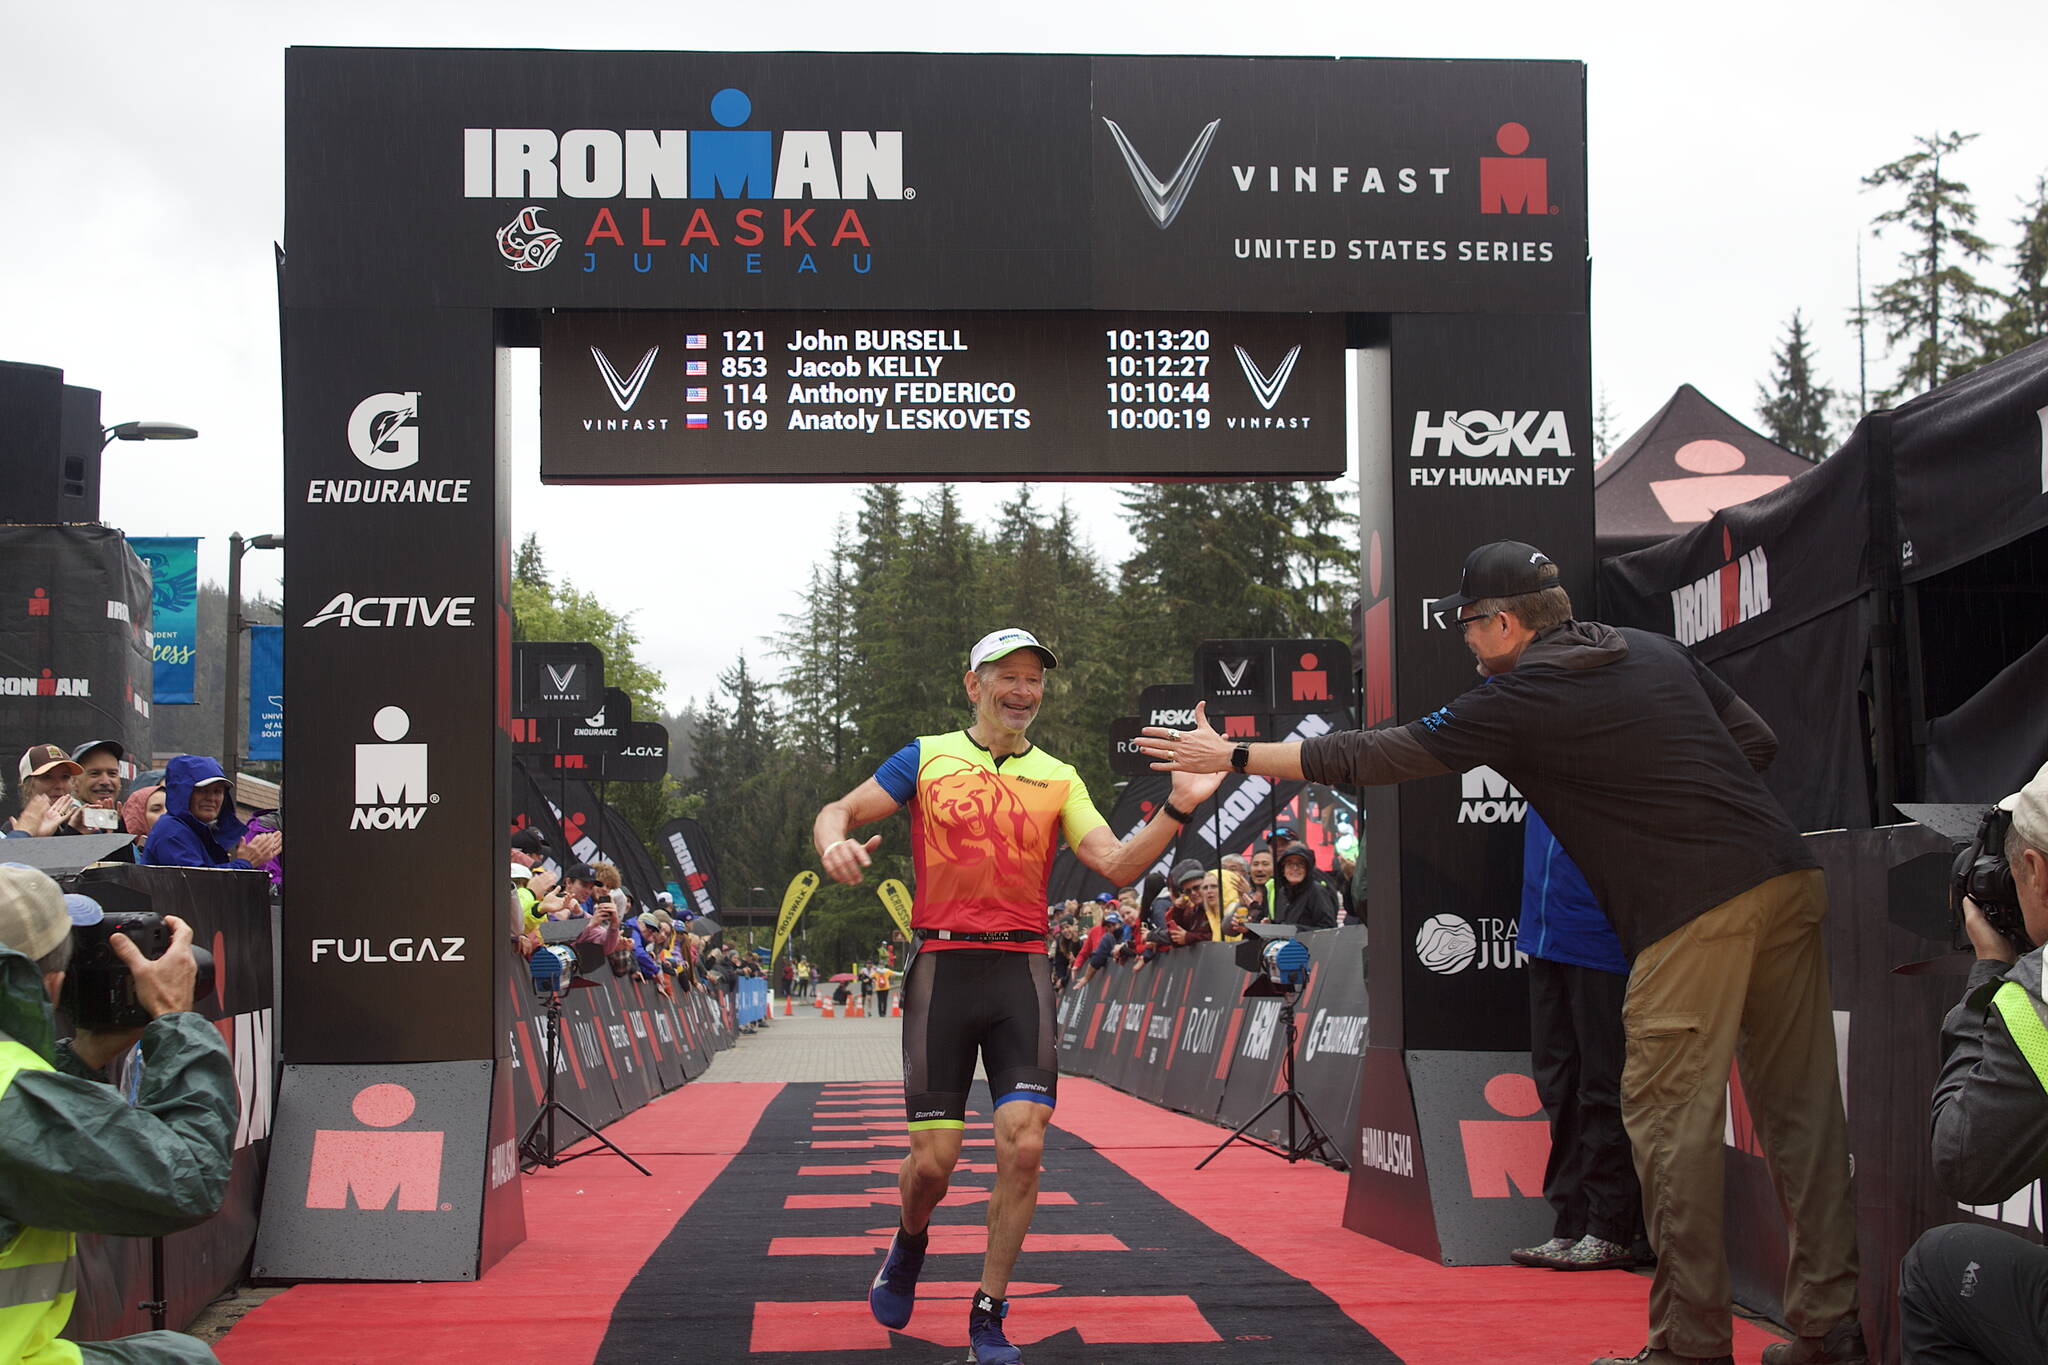 John Bursell, 58, a Juneau resident and veteran of more than 20 Ironman races, finishes the Ironman Alaska with a time of 10:13:20. He was hailed by the race announcer as the first Juneauite to cross the finish line, which occurred because he was among the earliest of the participants who had staggered starting times, although he actually finished about 10 minutes slower than the fastest local resident. (Mark Sabbatini / Juneau Empire)